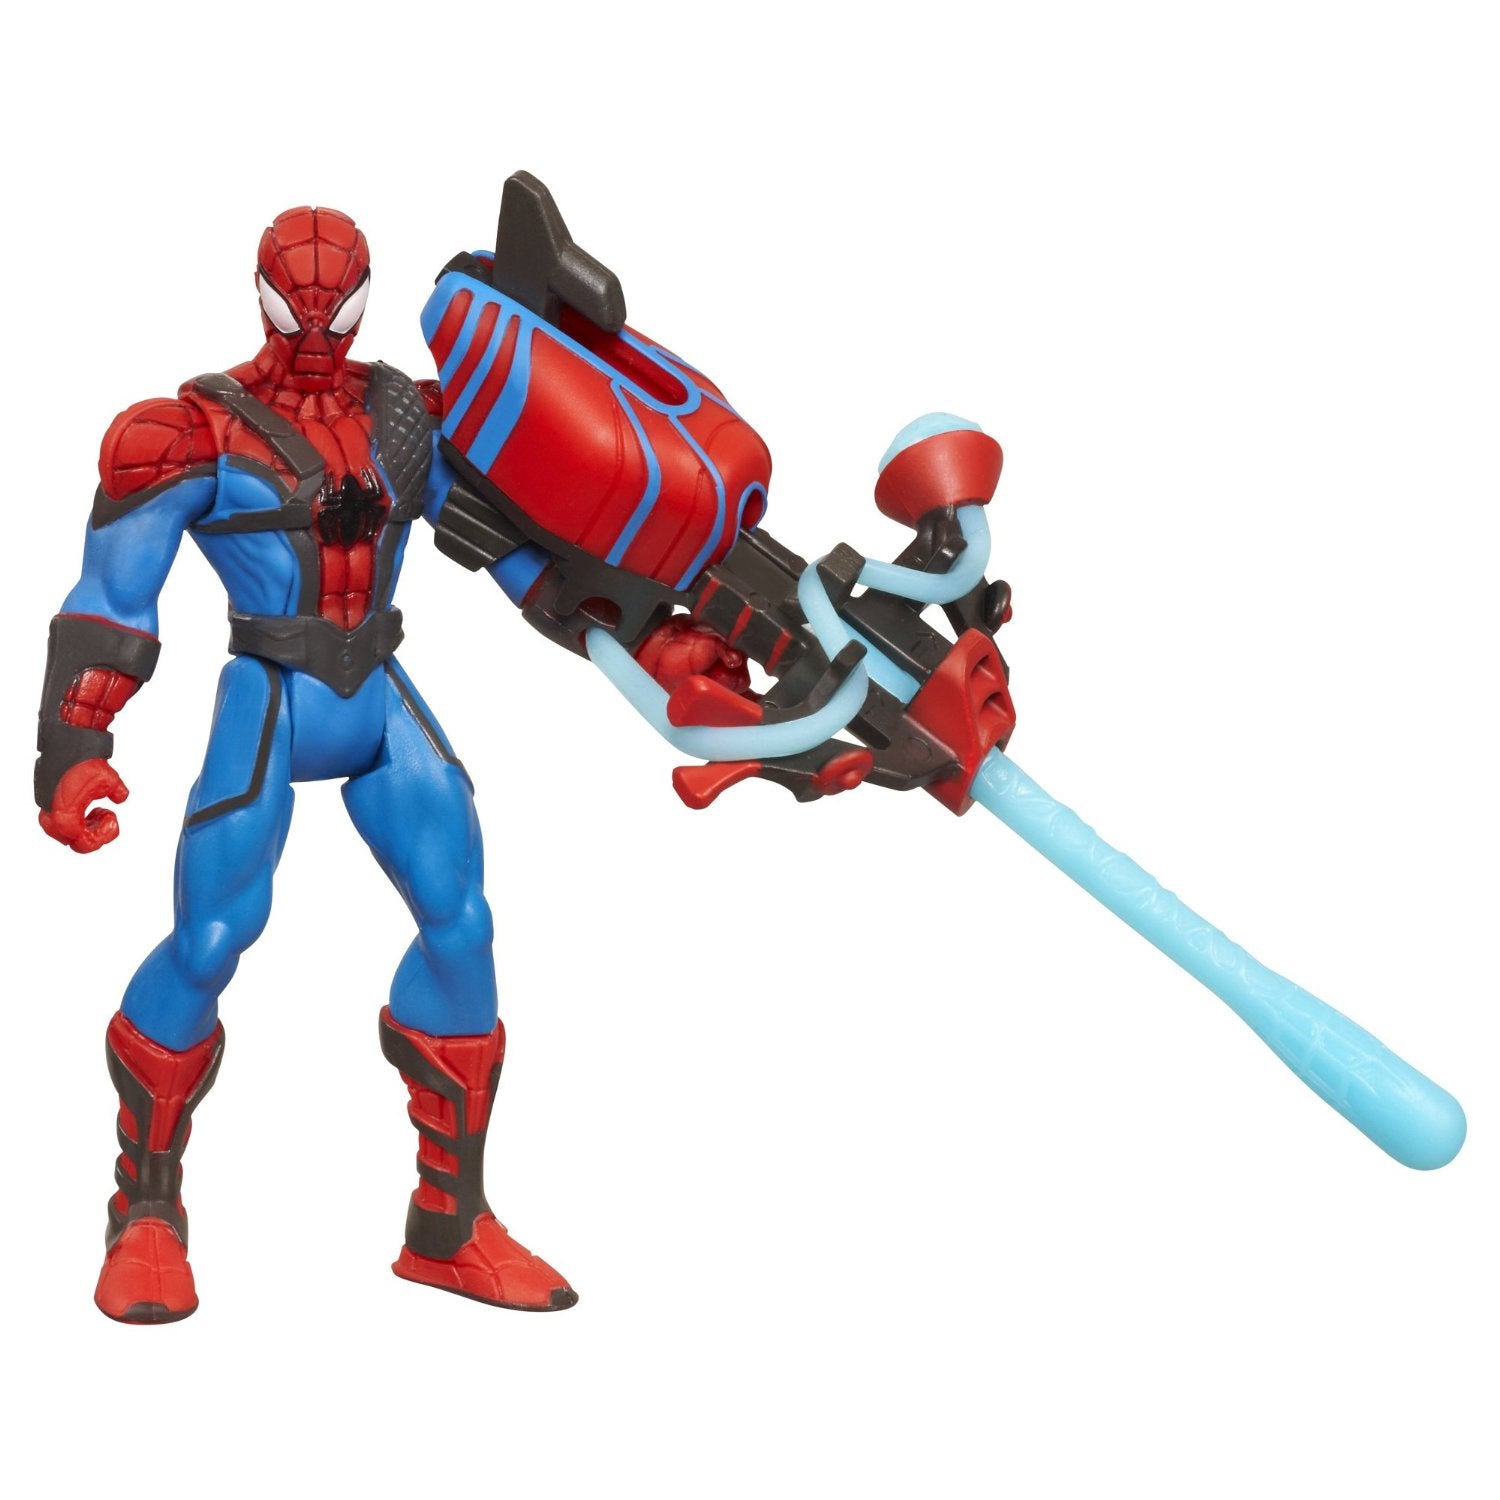 Spider-Man Toys - Crossbow Chaos Action Figure